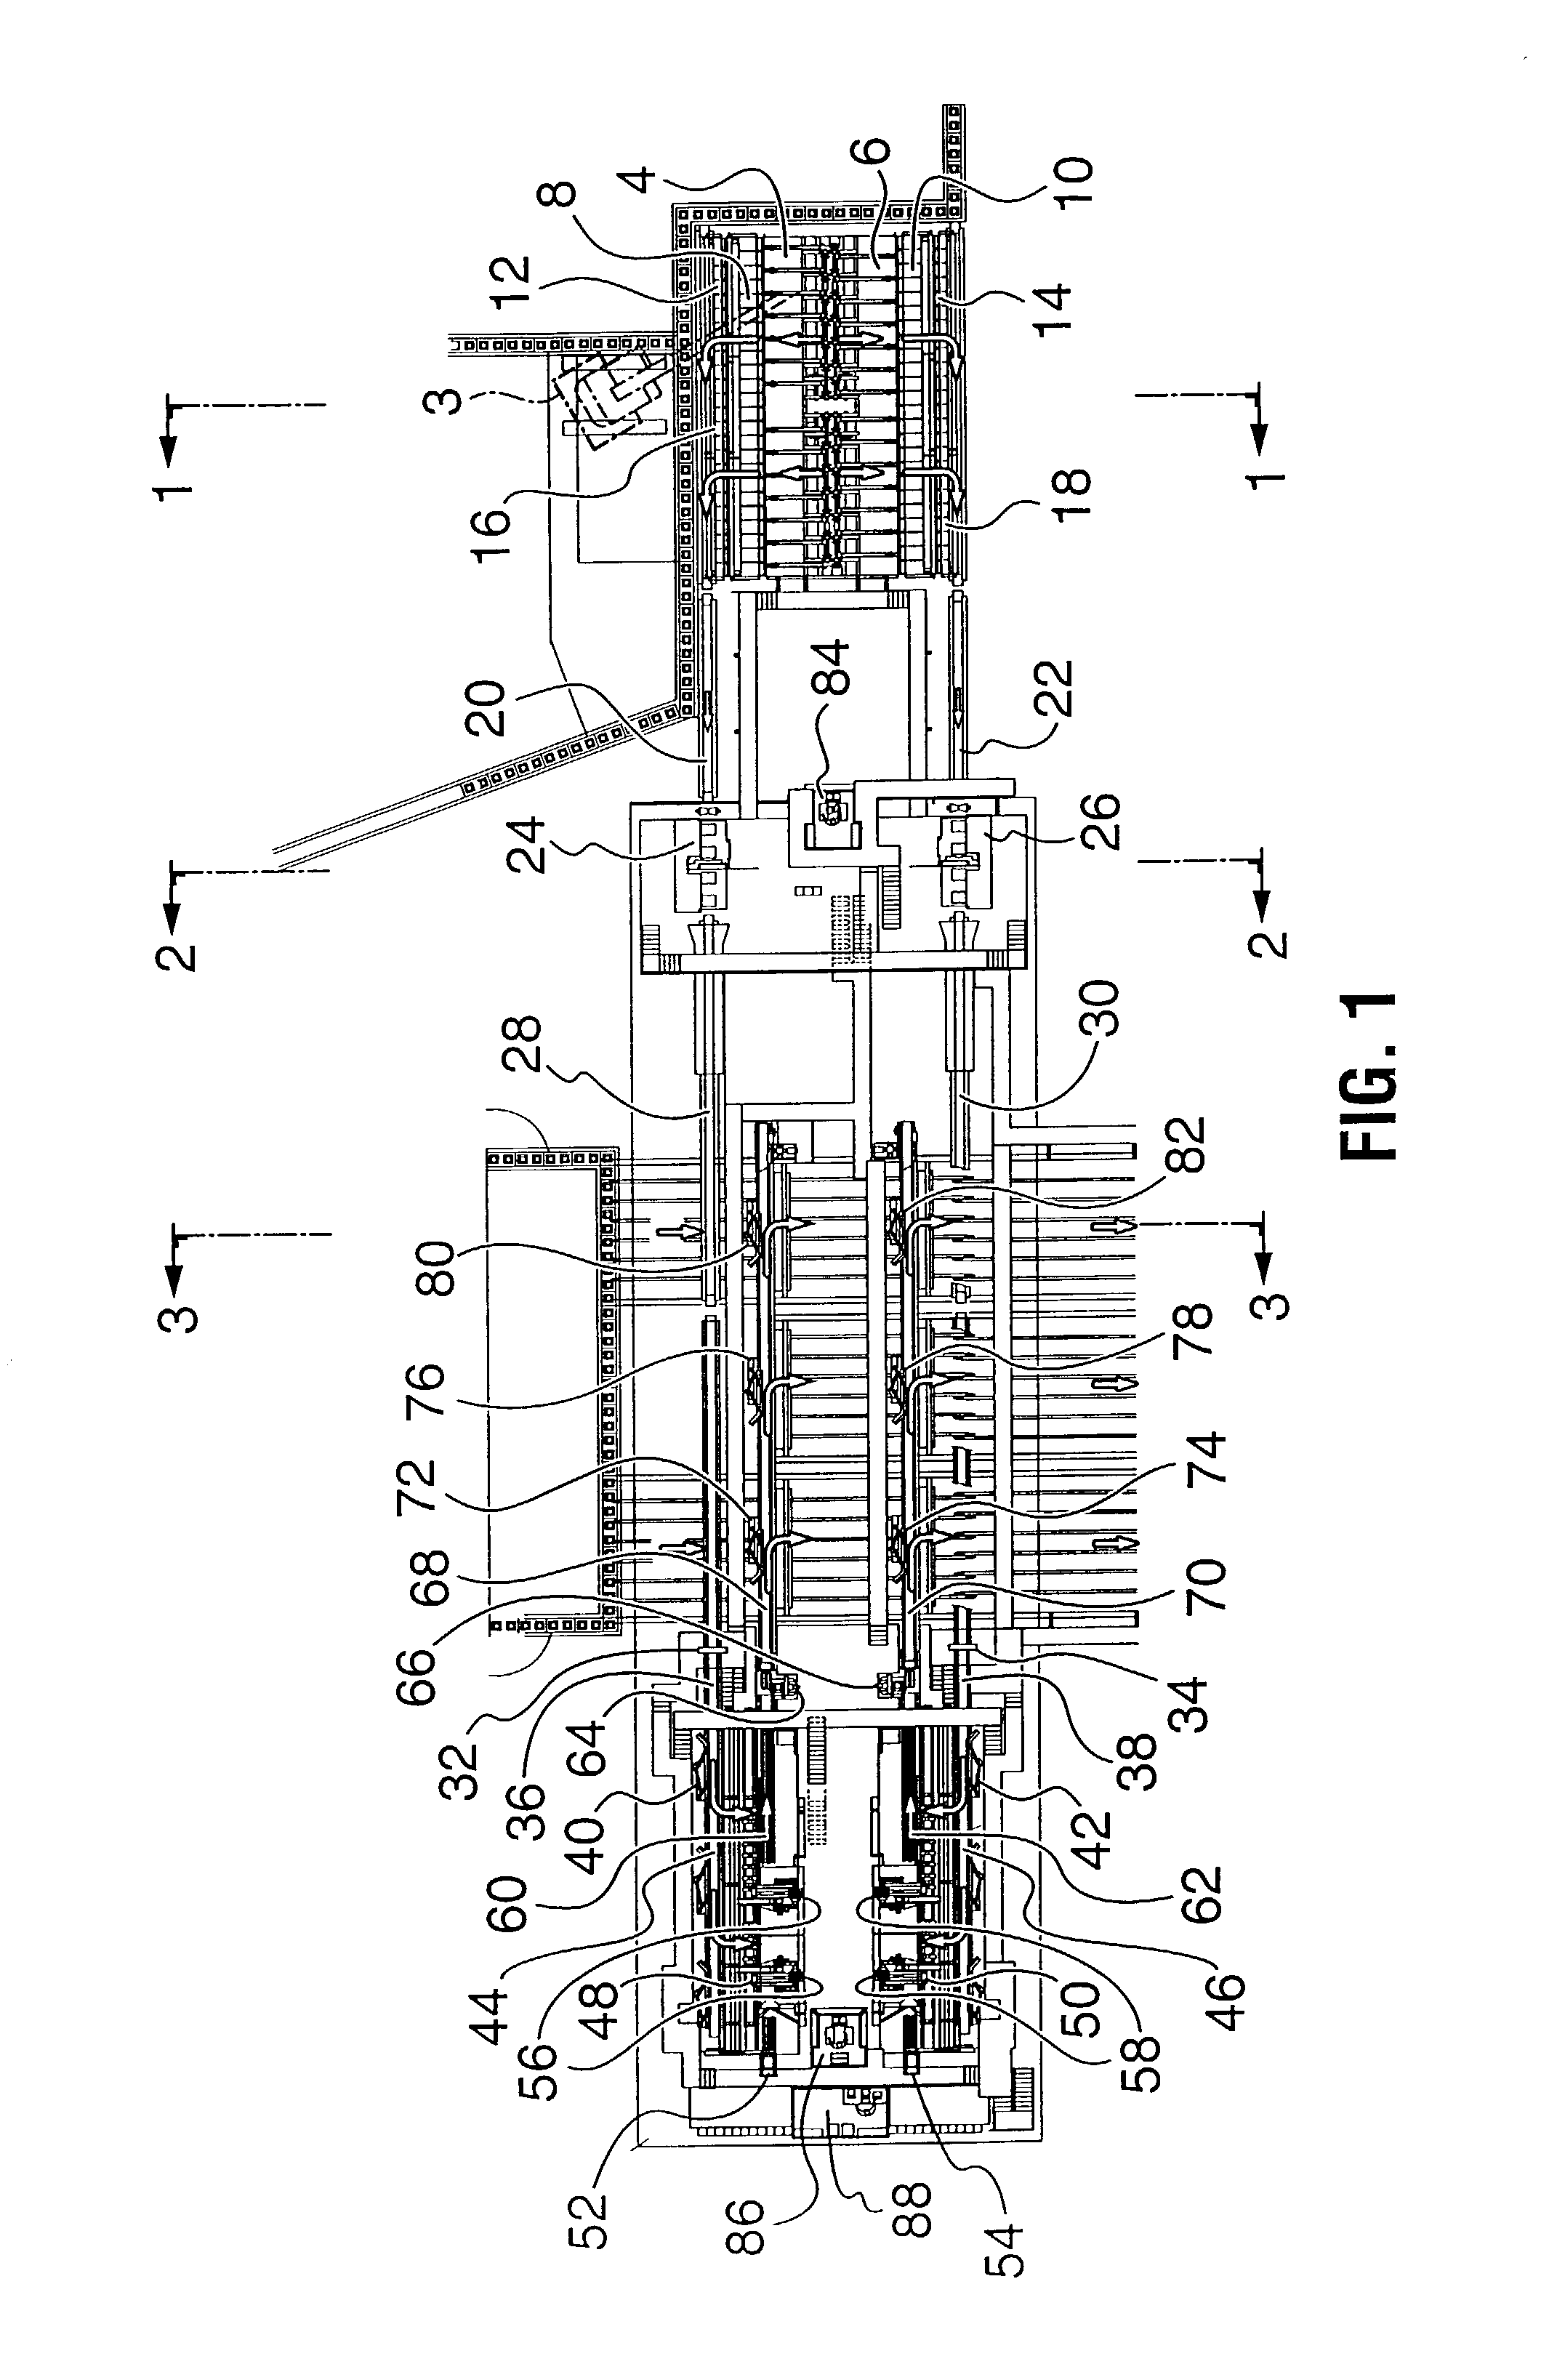 Method and apparatus for singulating, debarking, scanning and automatically sawing and sorting logs into lengths